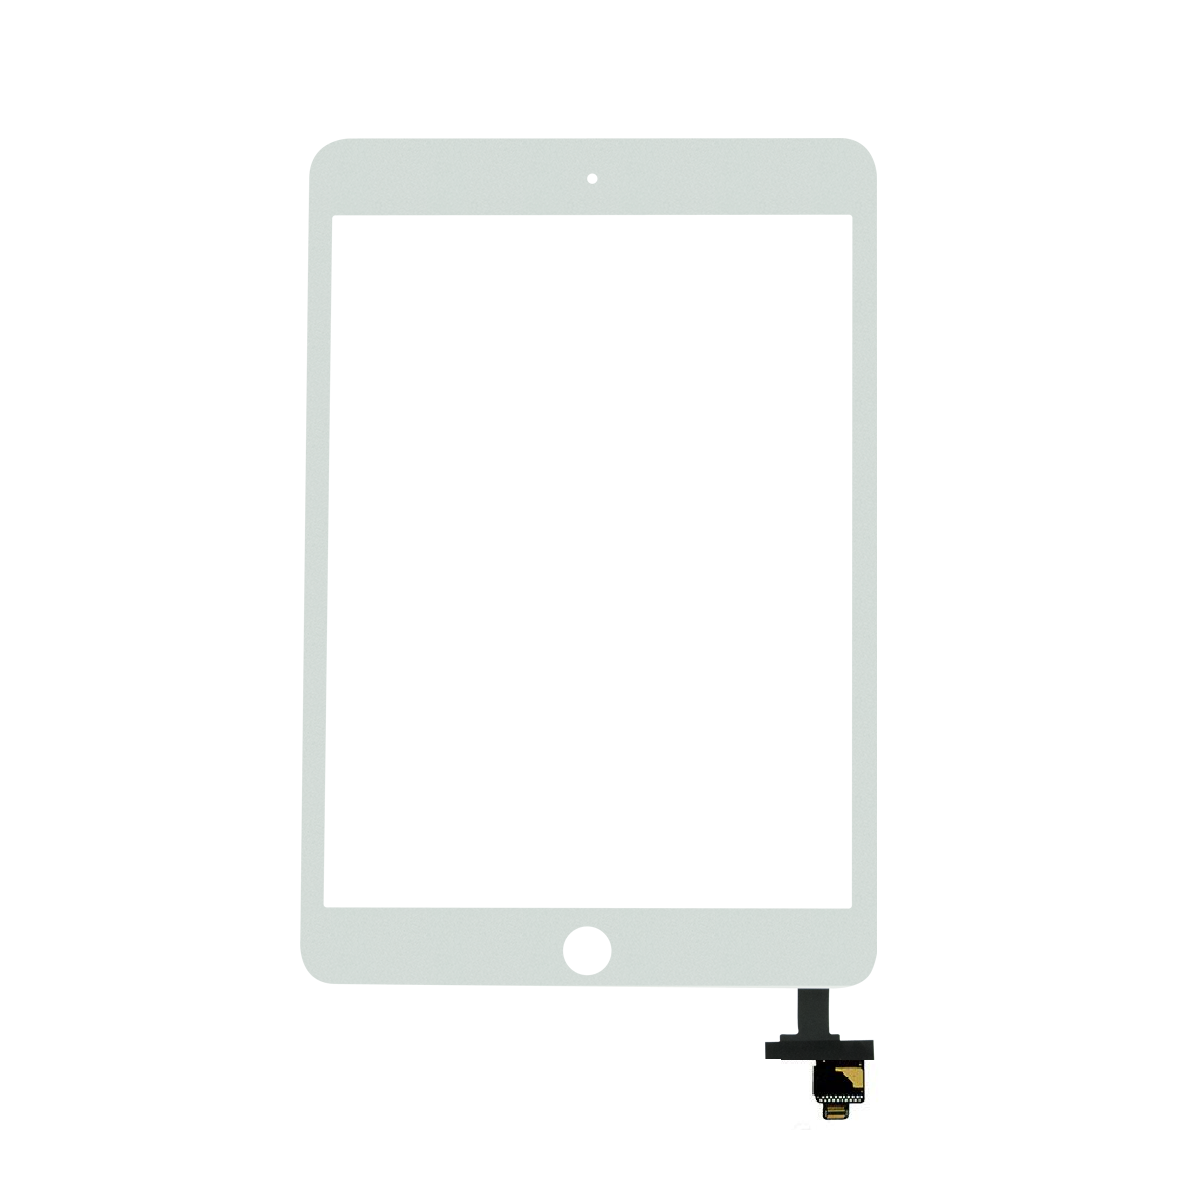 Apple iPad Mini 3 Replacement Touch Screen Assembly - White for [product_price] - First Help Tech